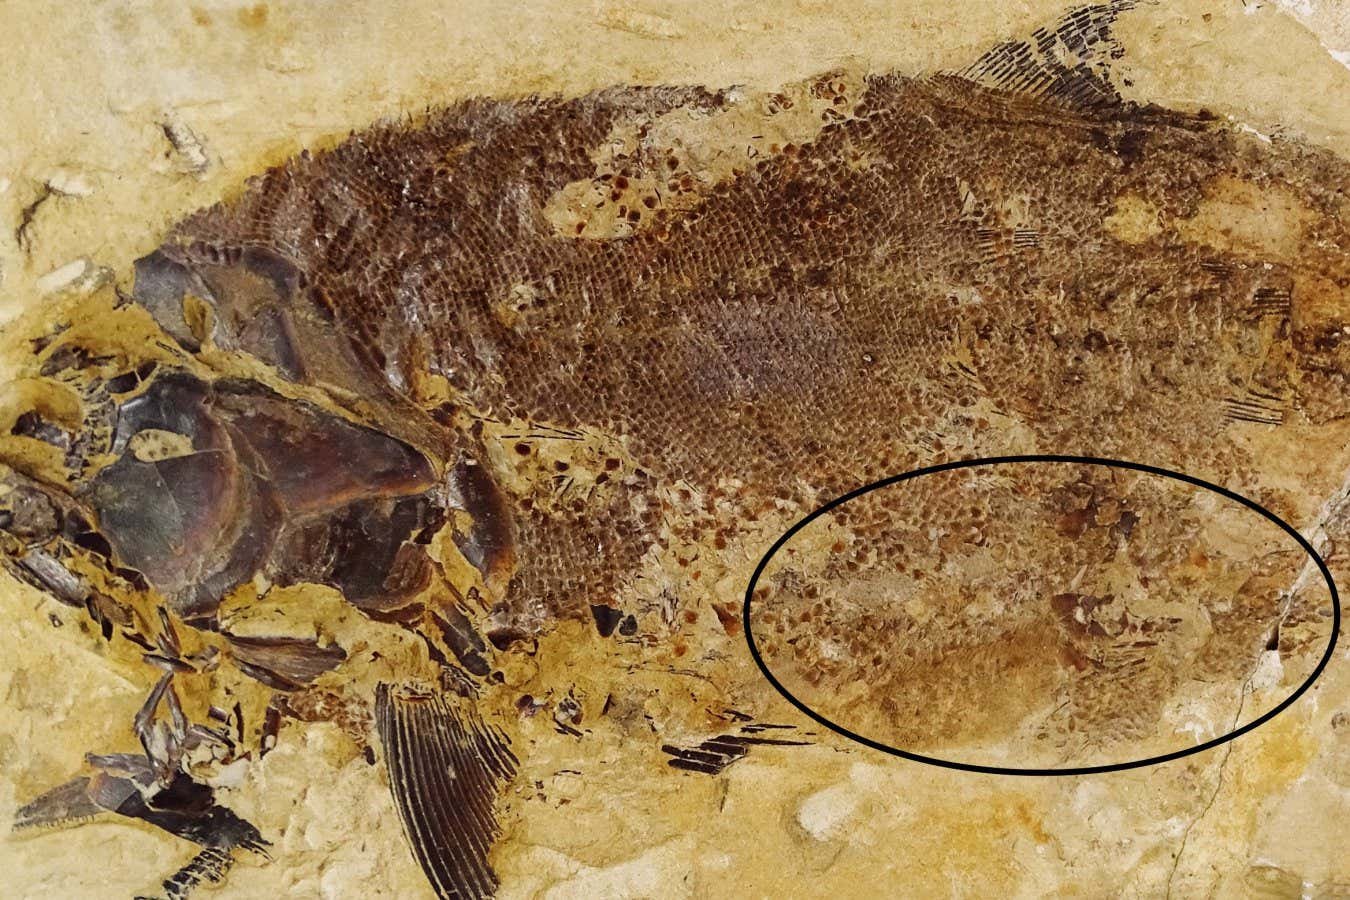 Exquisite Jurassic fossils reveal cannibalism in ancient fish